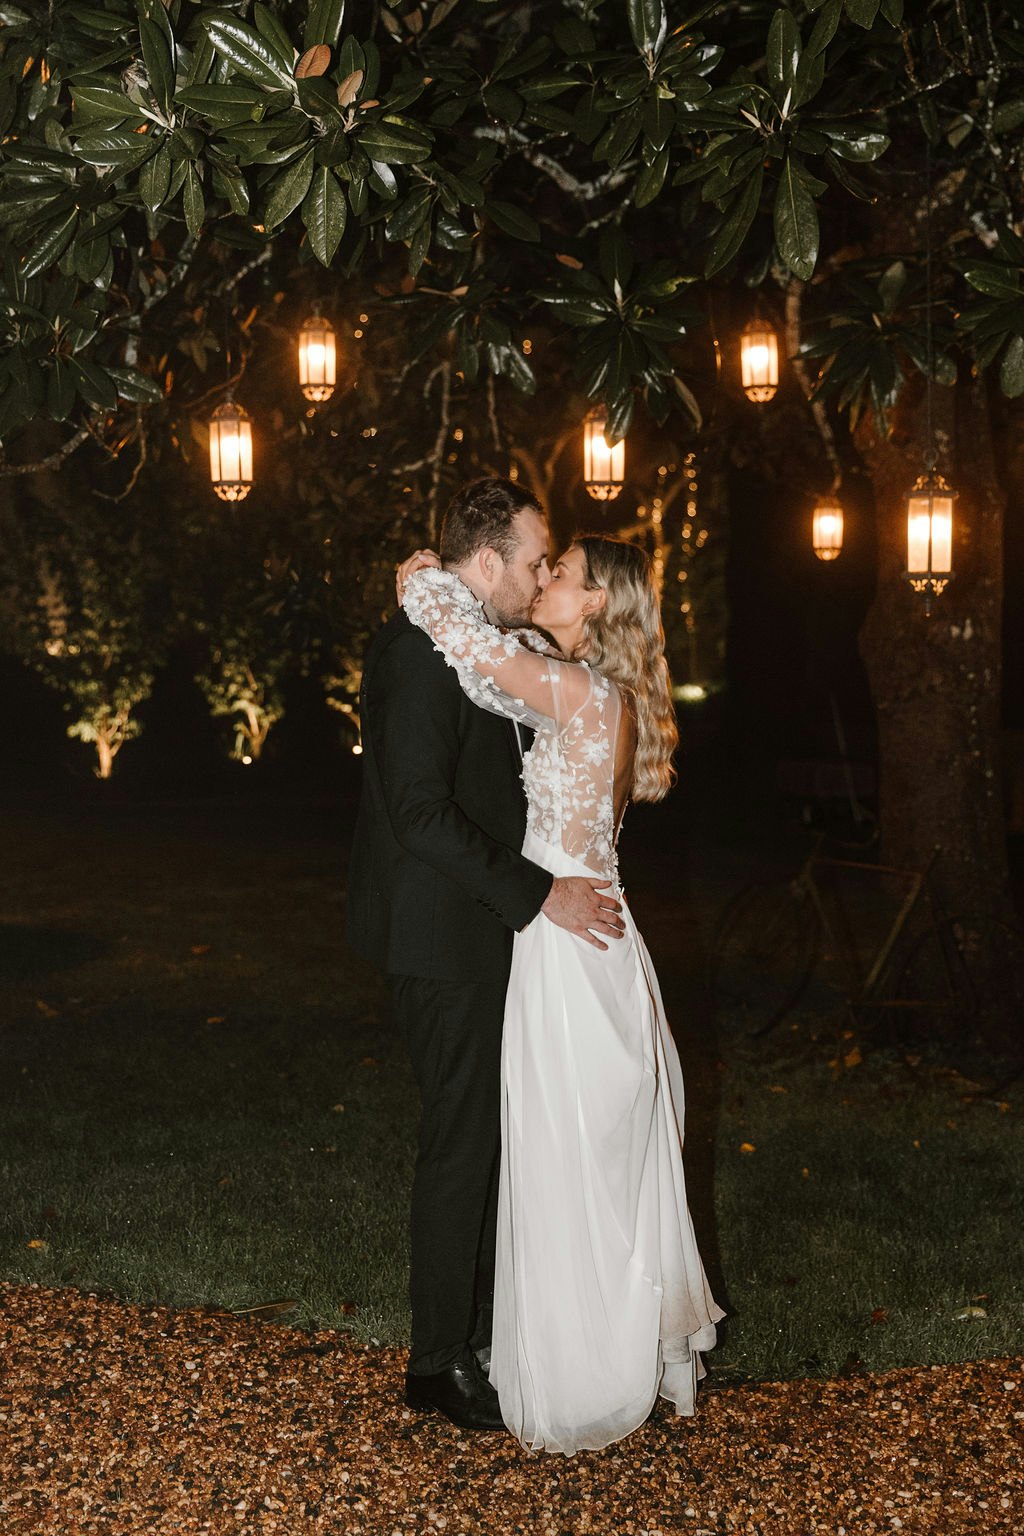 Bride and groom kissing under lanterns in tree outside